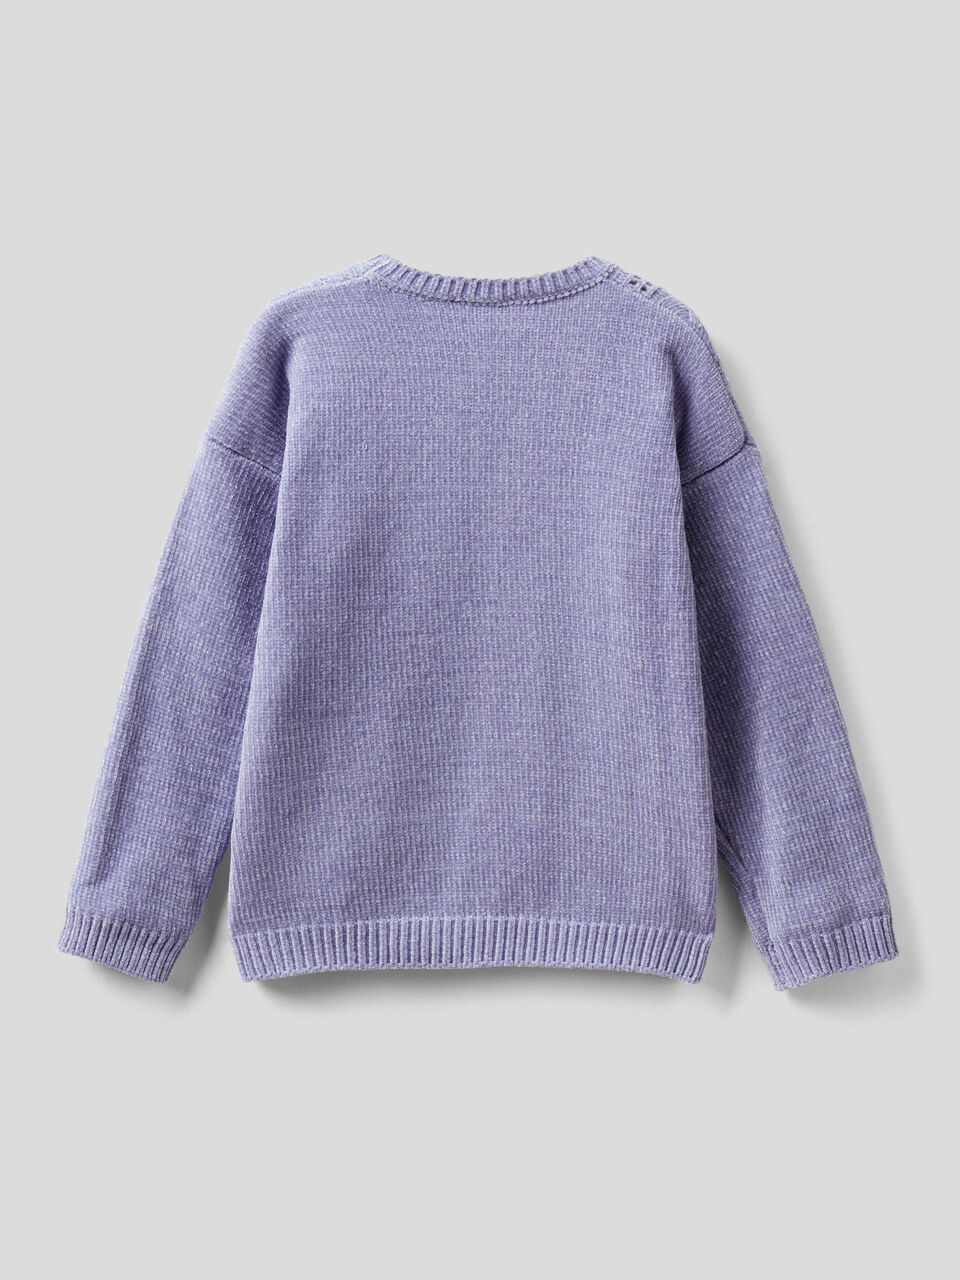 Tween Girls Long Sleeve Cable Knit Chenille Sweater